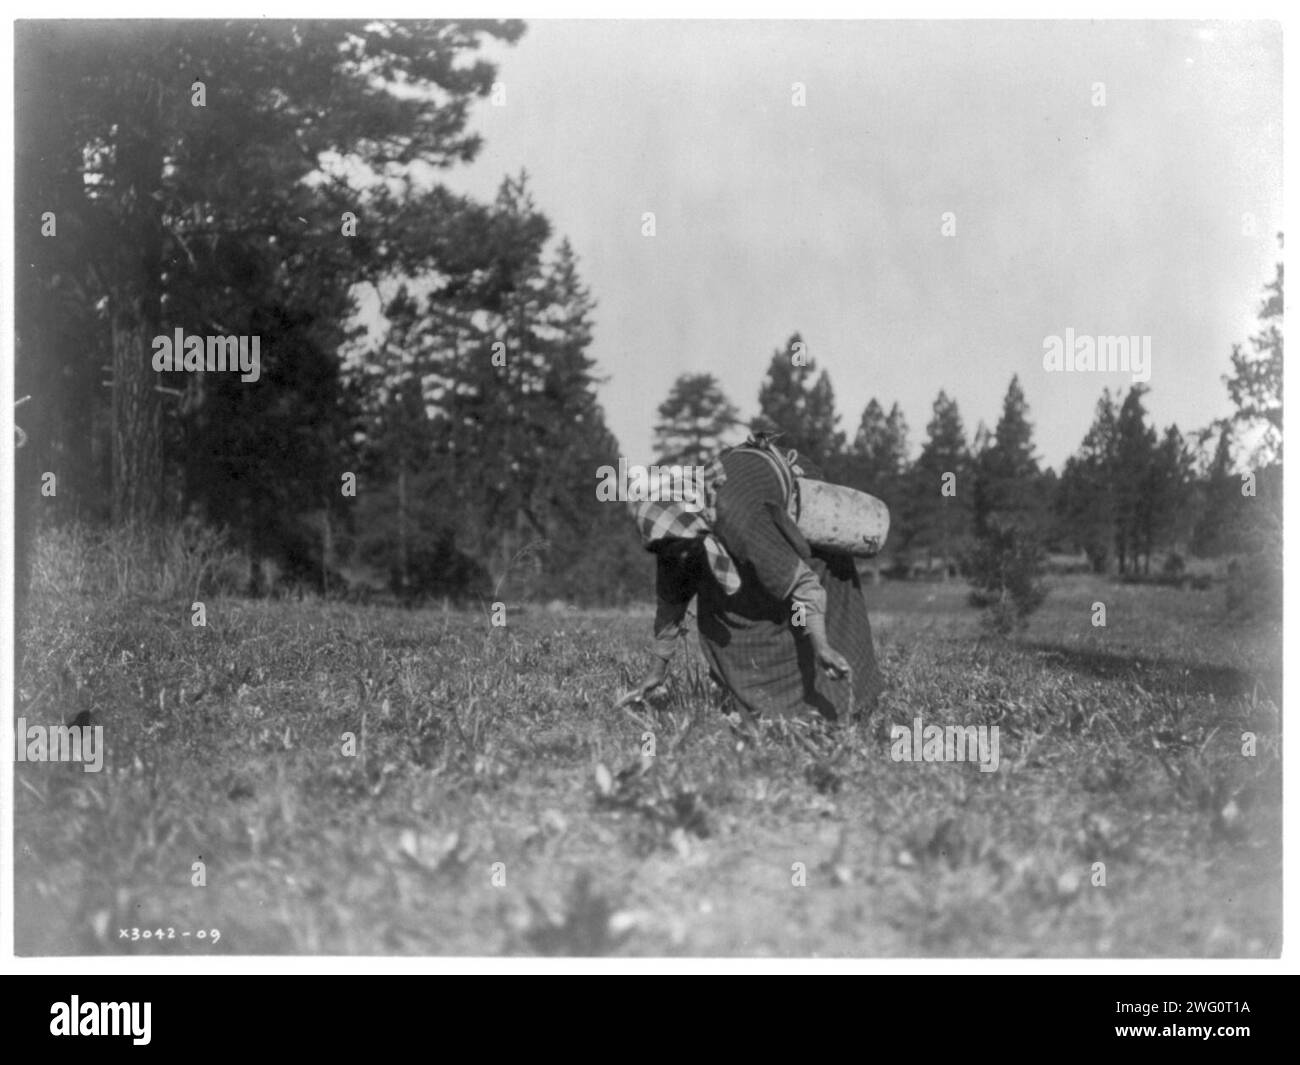 The piyake gatherer, c1910. Woman in long dress and bandana stooped over collecting piyake (roots) with hand scythe, leather basket at waist, trees in background. Stock Photo